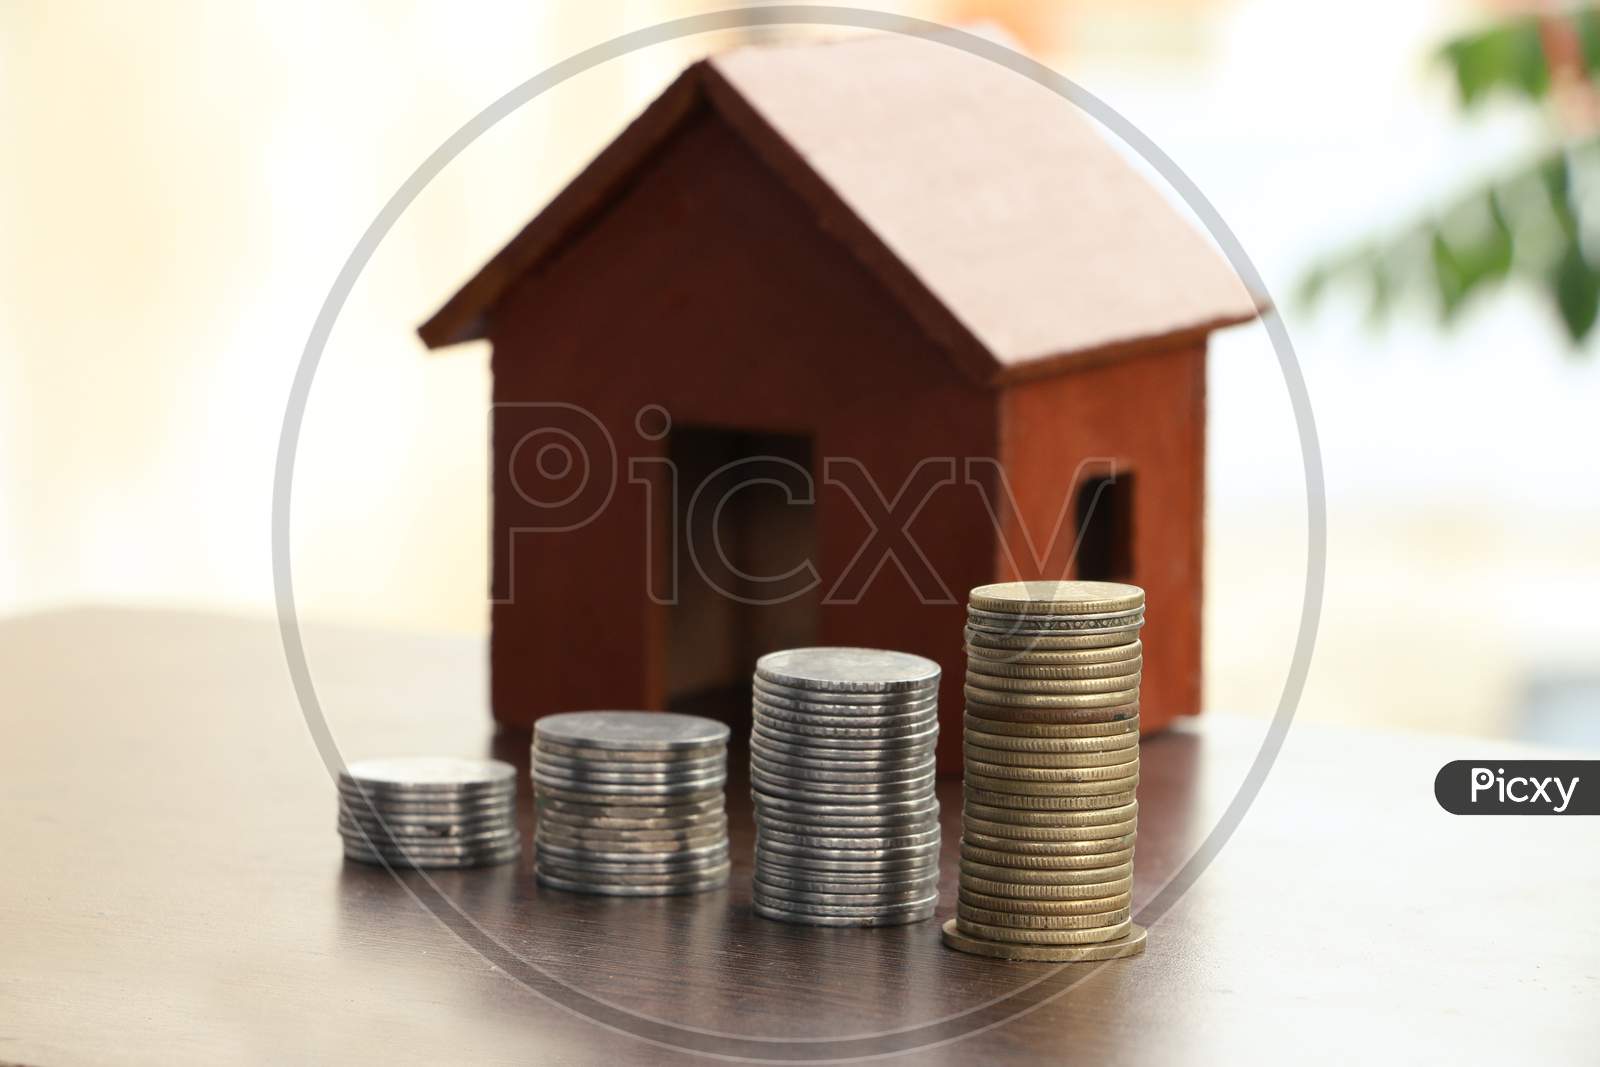 Money Coin Stack Growing Graph With Home Model On Wood Table In The Public Park Background. Saving Money And Investment Concept.